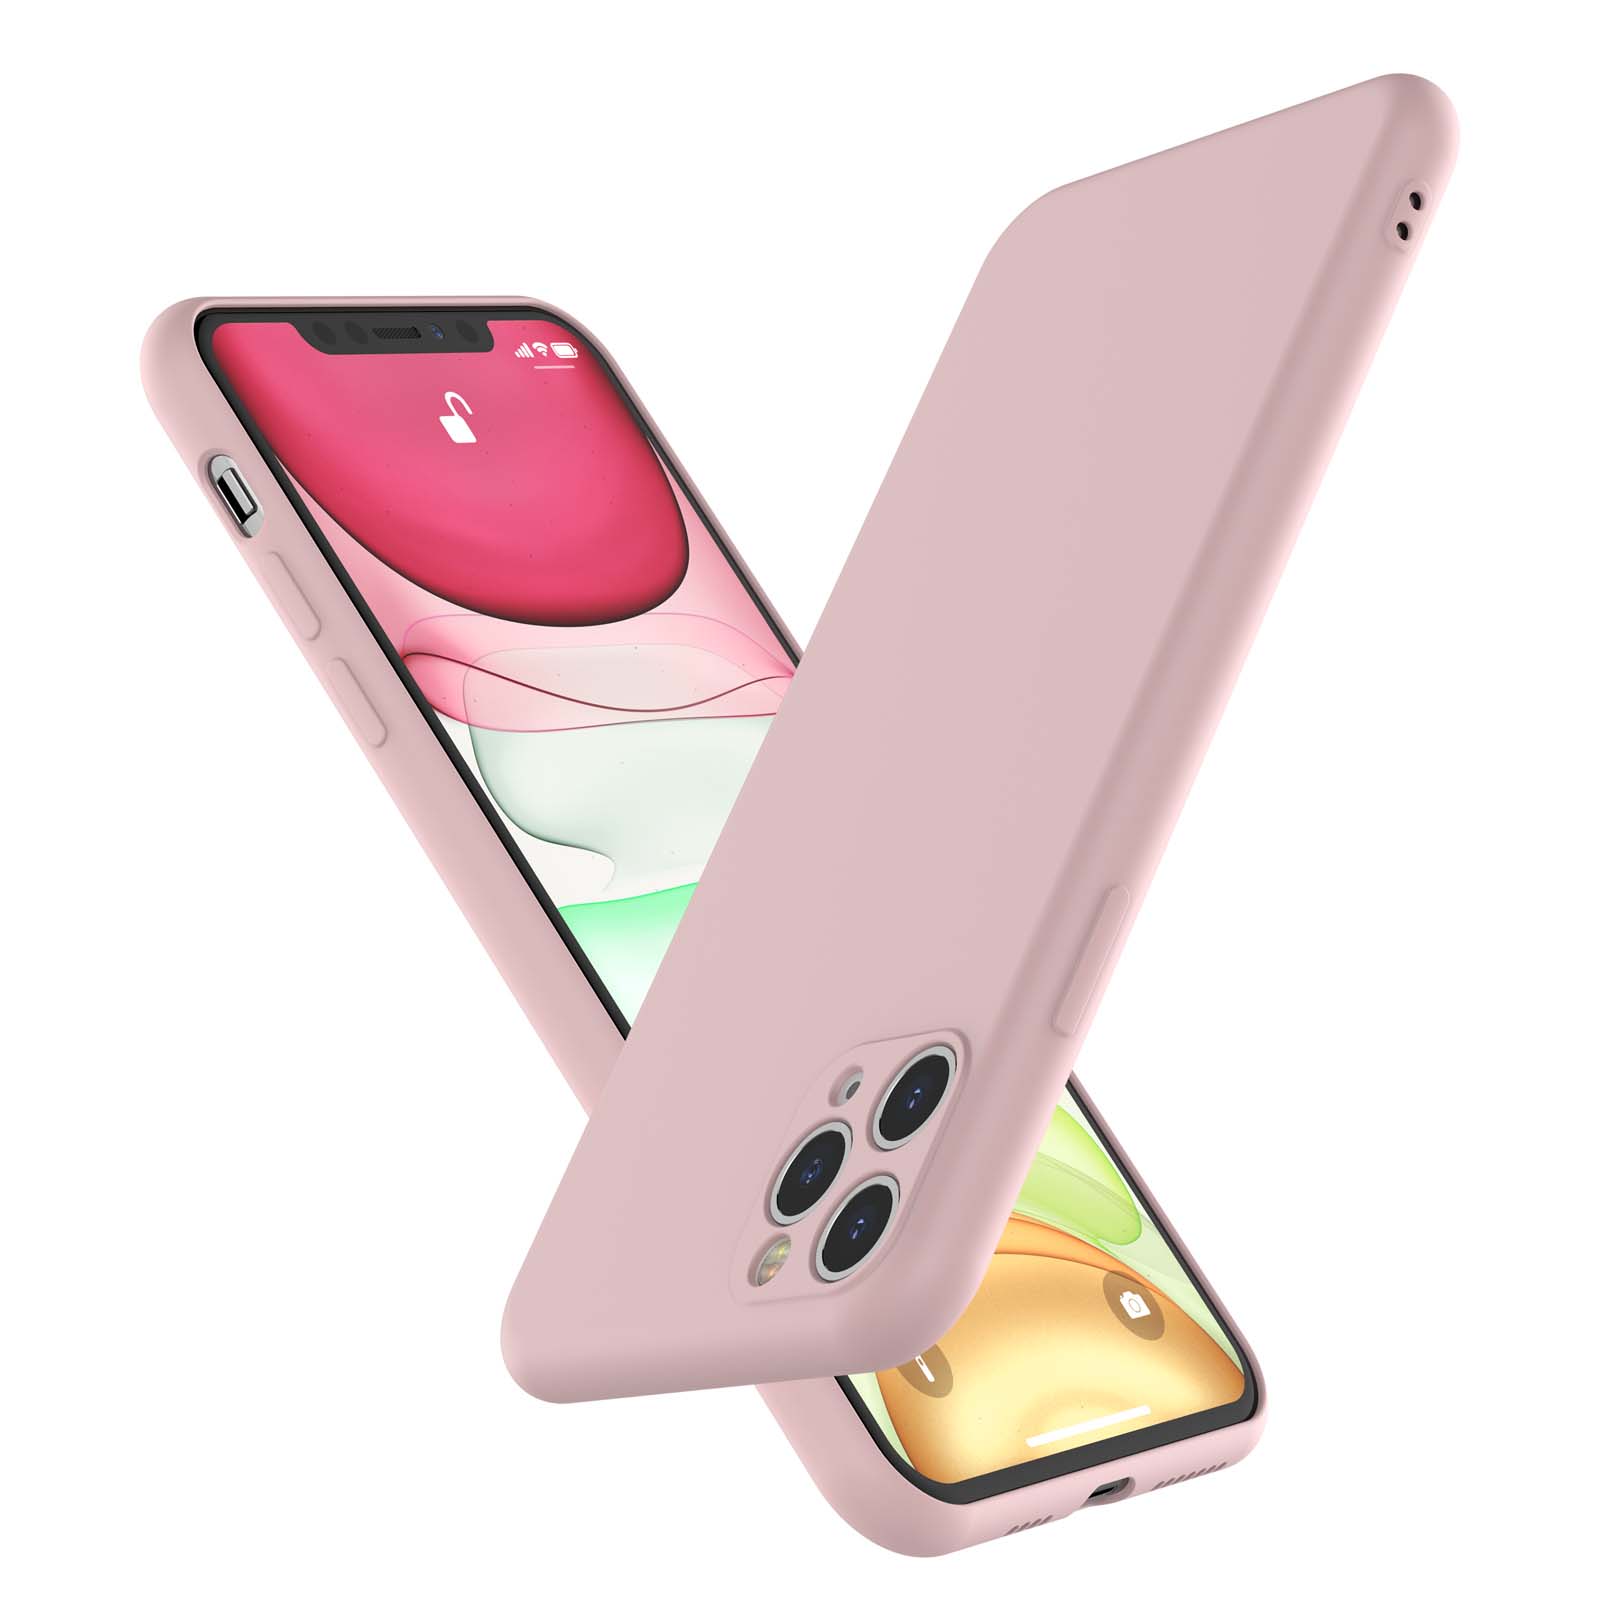 iPhone 11 Pro 5.8" Case, Slim Case for iPhone 11 Pro, Njjex Liquid Silicone Gel Rubber Shockproof Case Ultra Thin 11 Pro Case Slim Matte Surface Cover for Apple iPhone 11 Pro (2019) 5.8" -Pink - image 1 of 9